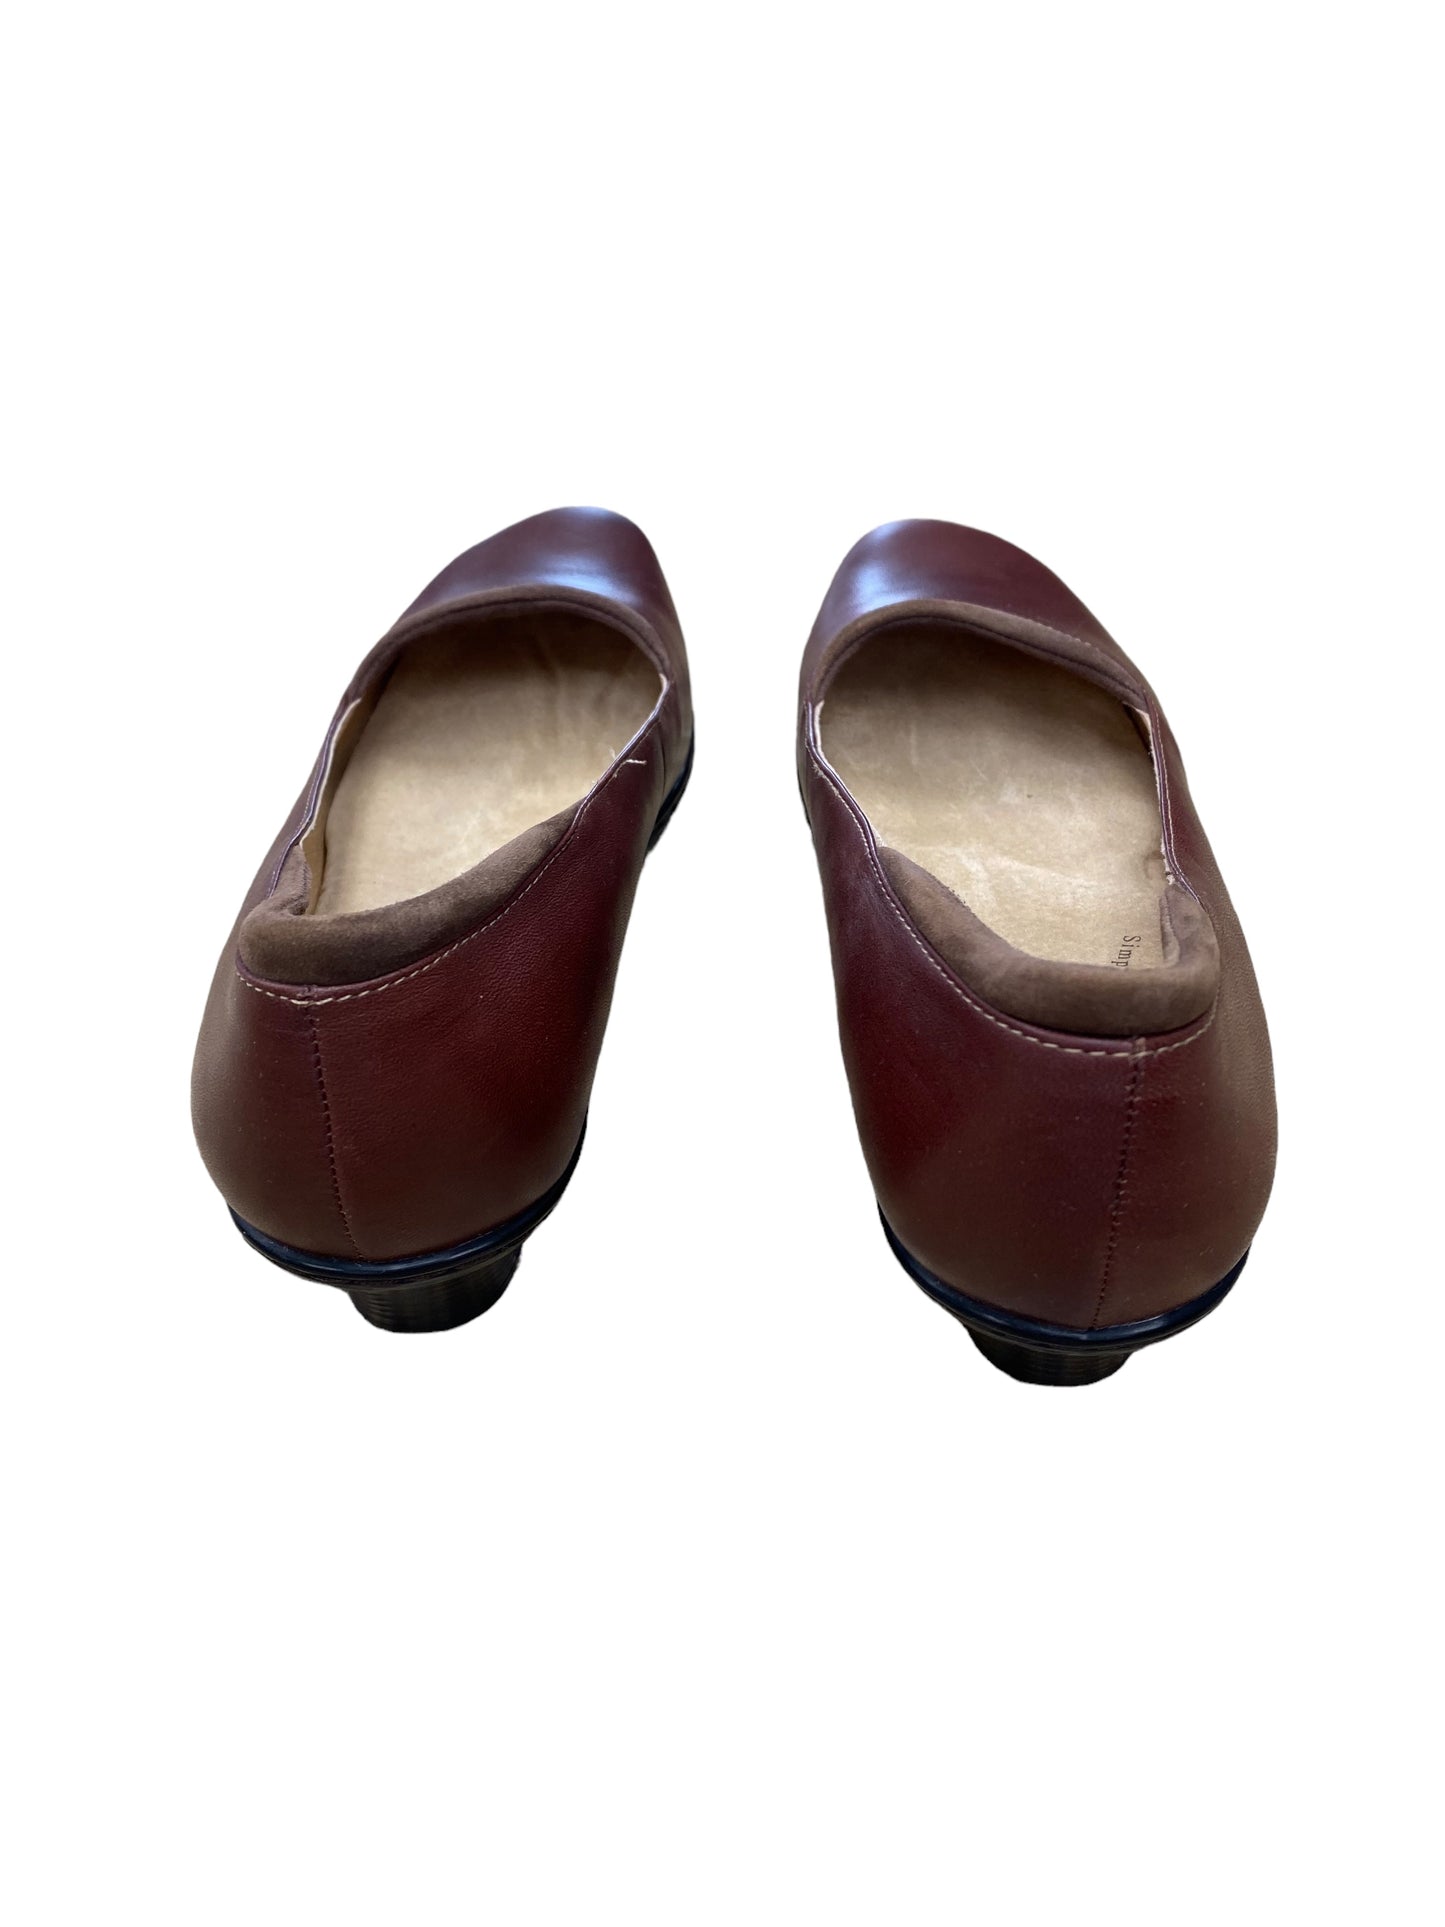 Brown Shoes Heels Block Softspots, Size 9